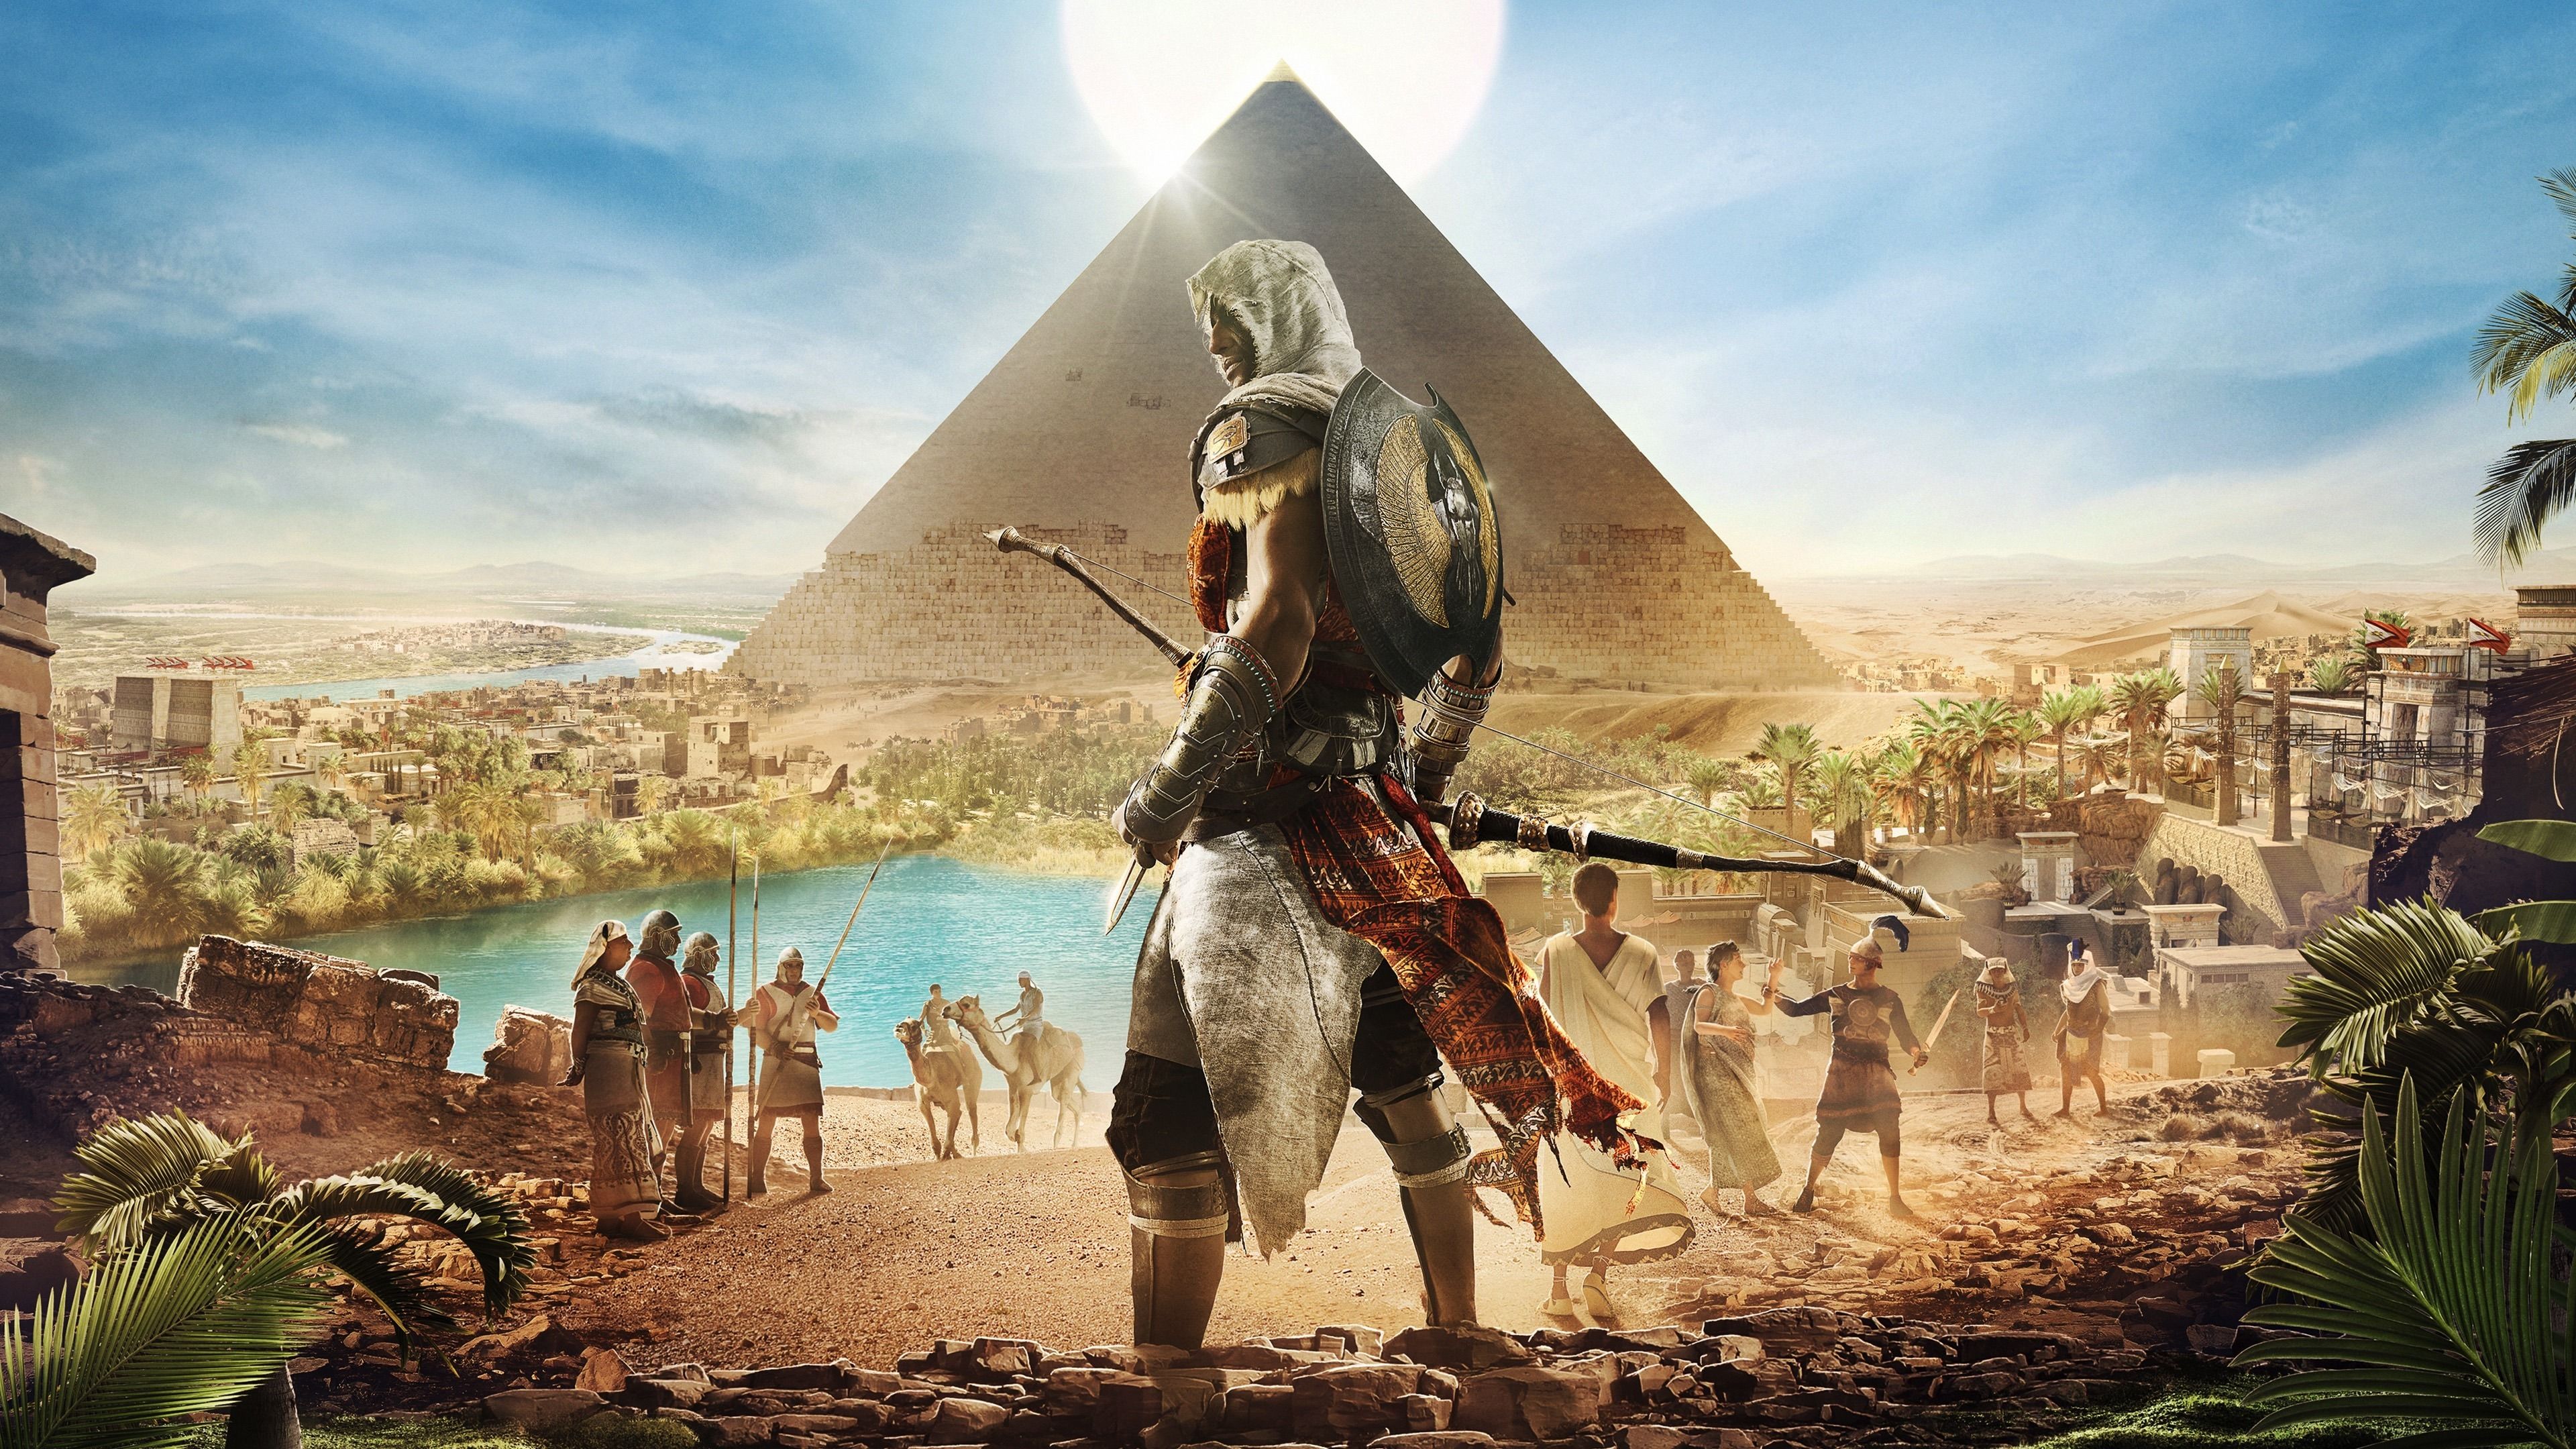 Download 3840x2400 wallpaper assassin's creed: origins, egypt, pyramids, video game, 4k, ultra HD 16: widescreen, 3840x2400 HD image, background, 2296